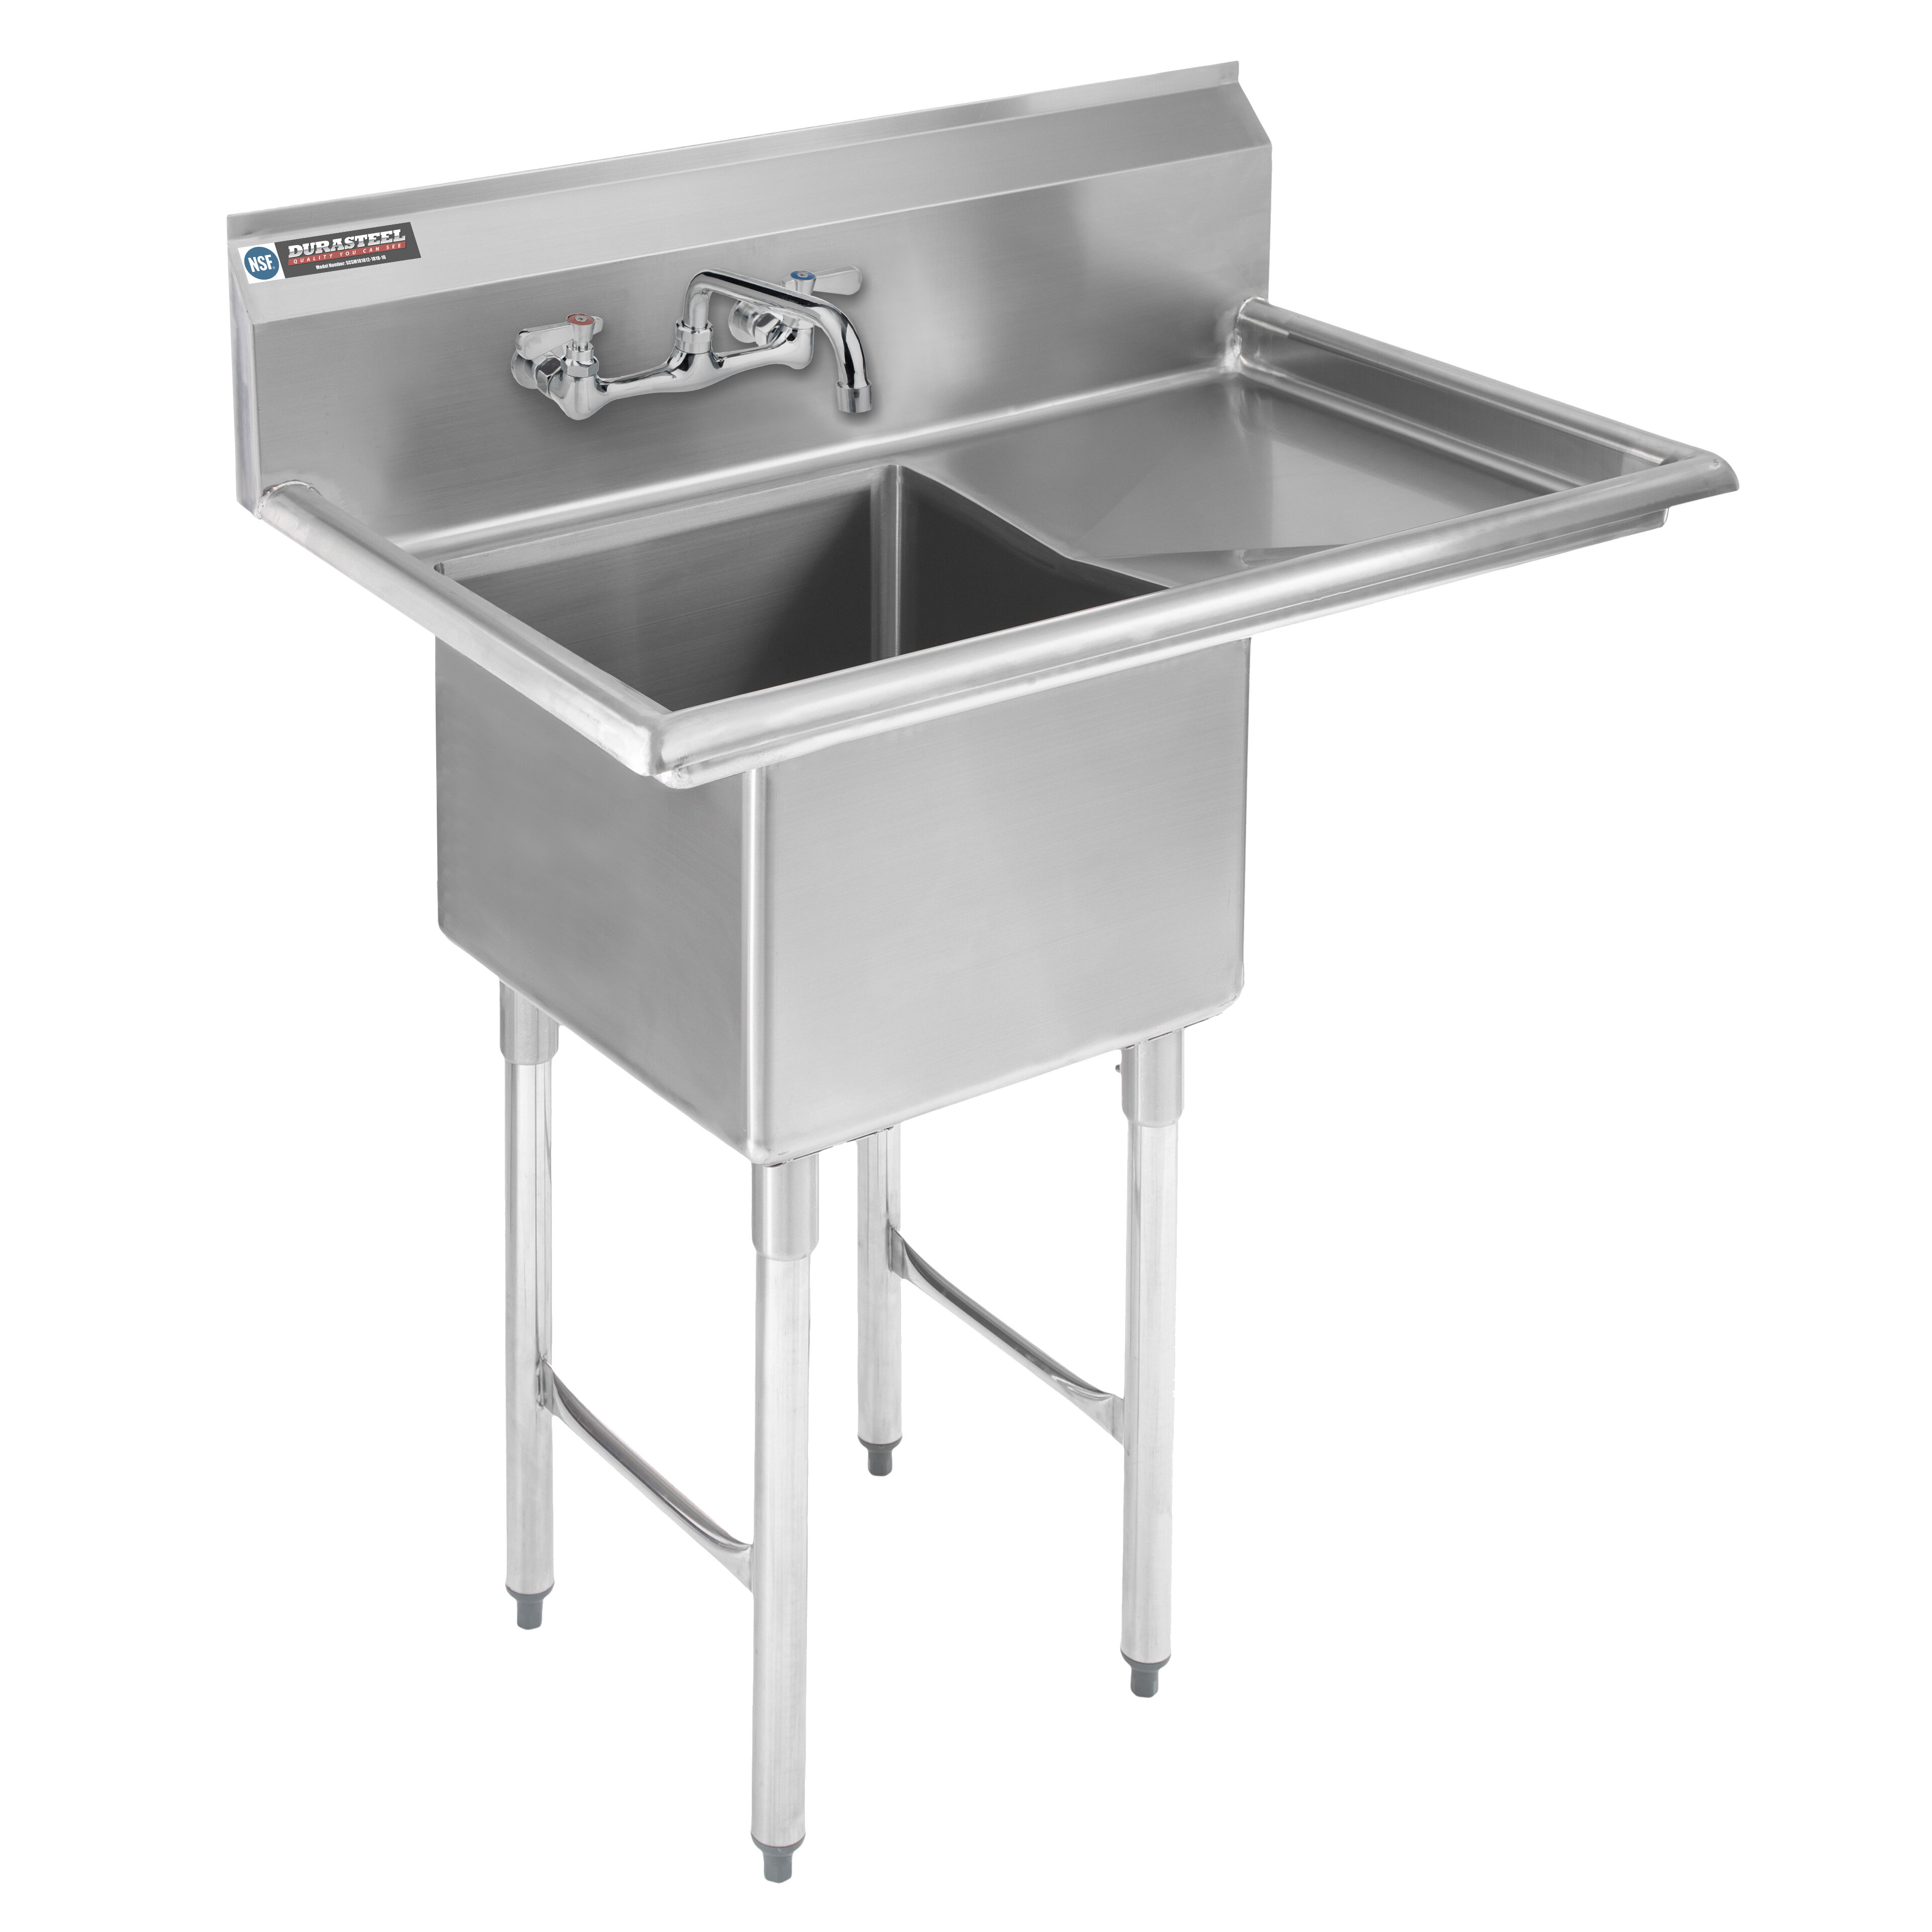 NSF Certified 24 x 24 Inner Tub Size with 10 Swivel Spout Faucet Kitchen, Laundry, Backyard, Garages DuraSteel Stainless Steel Prep & Utility Sink 1 Compartment Commercial Kitchen Sink 